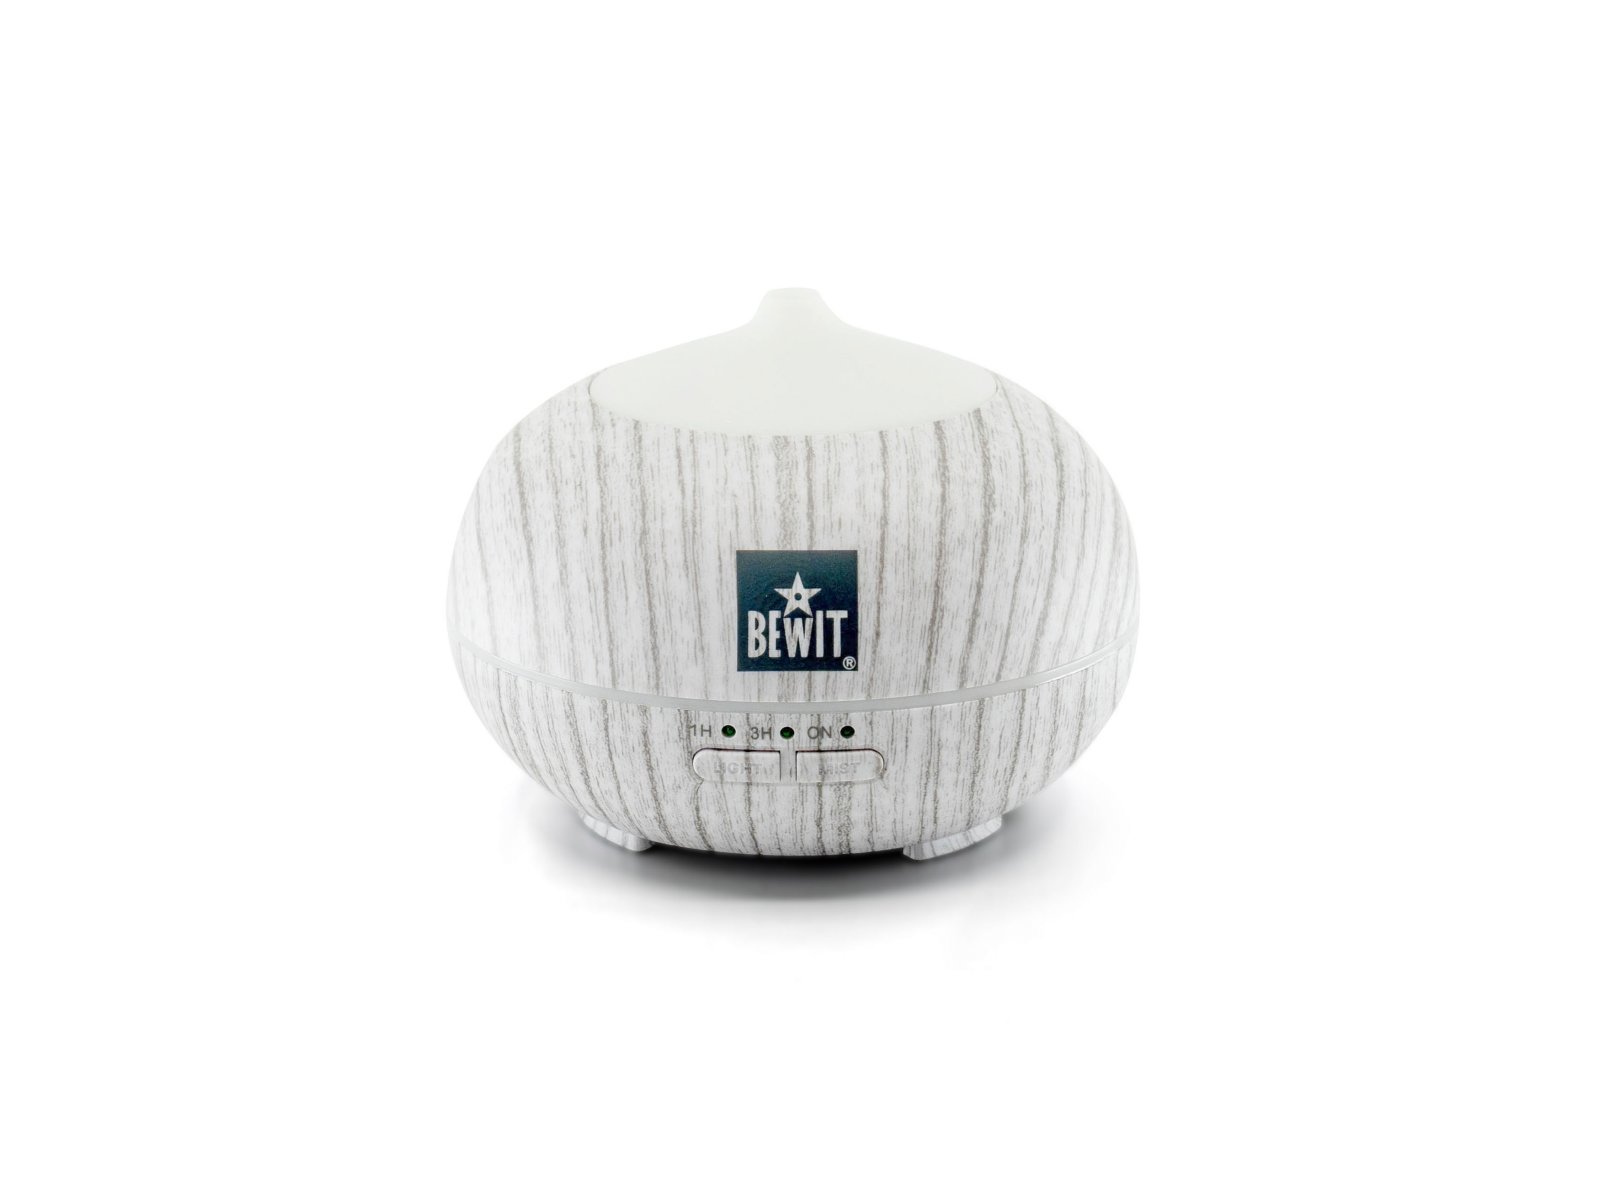 BEWIT Aroma diffuser SMELL LINE 150, white wood - Ultrasonic diffuser